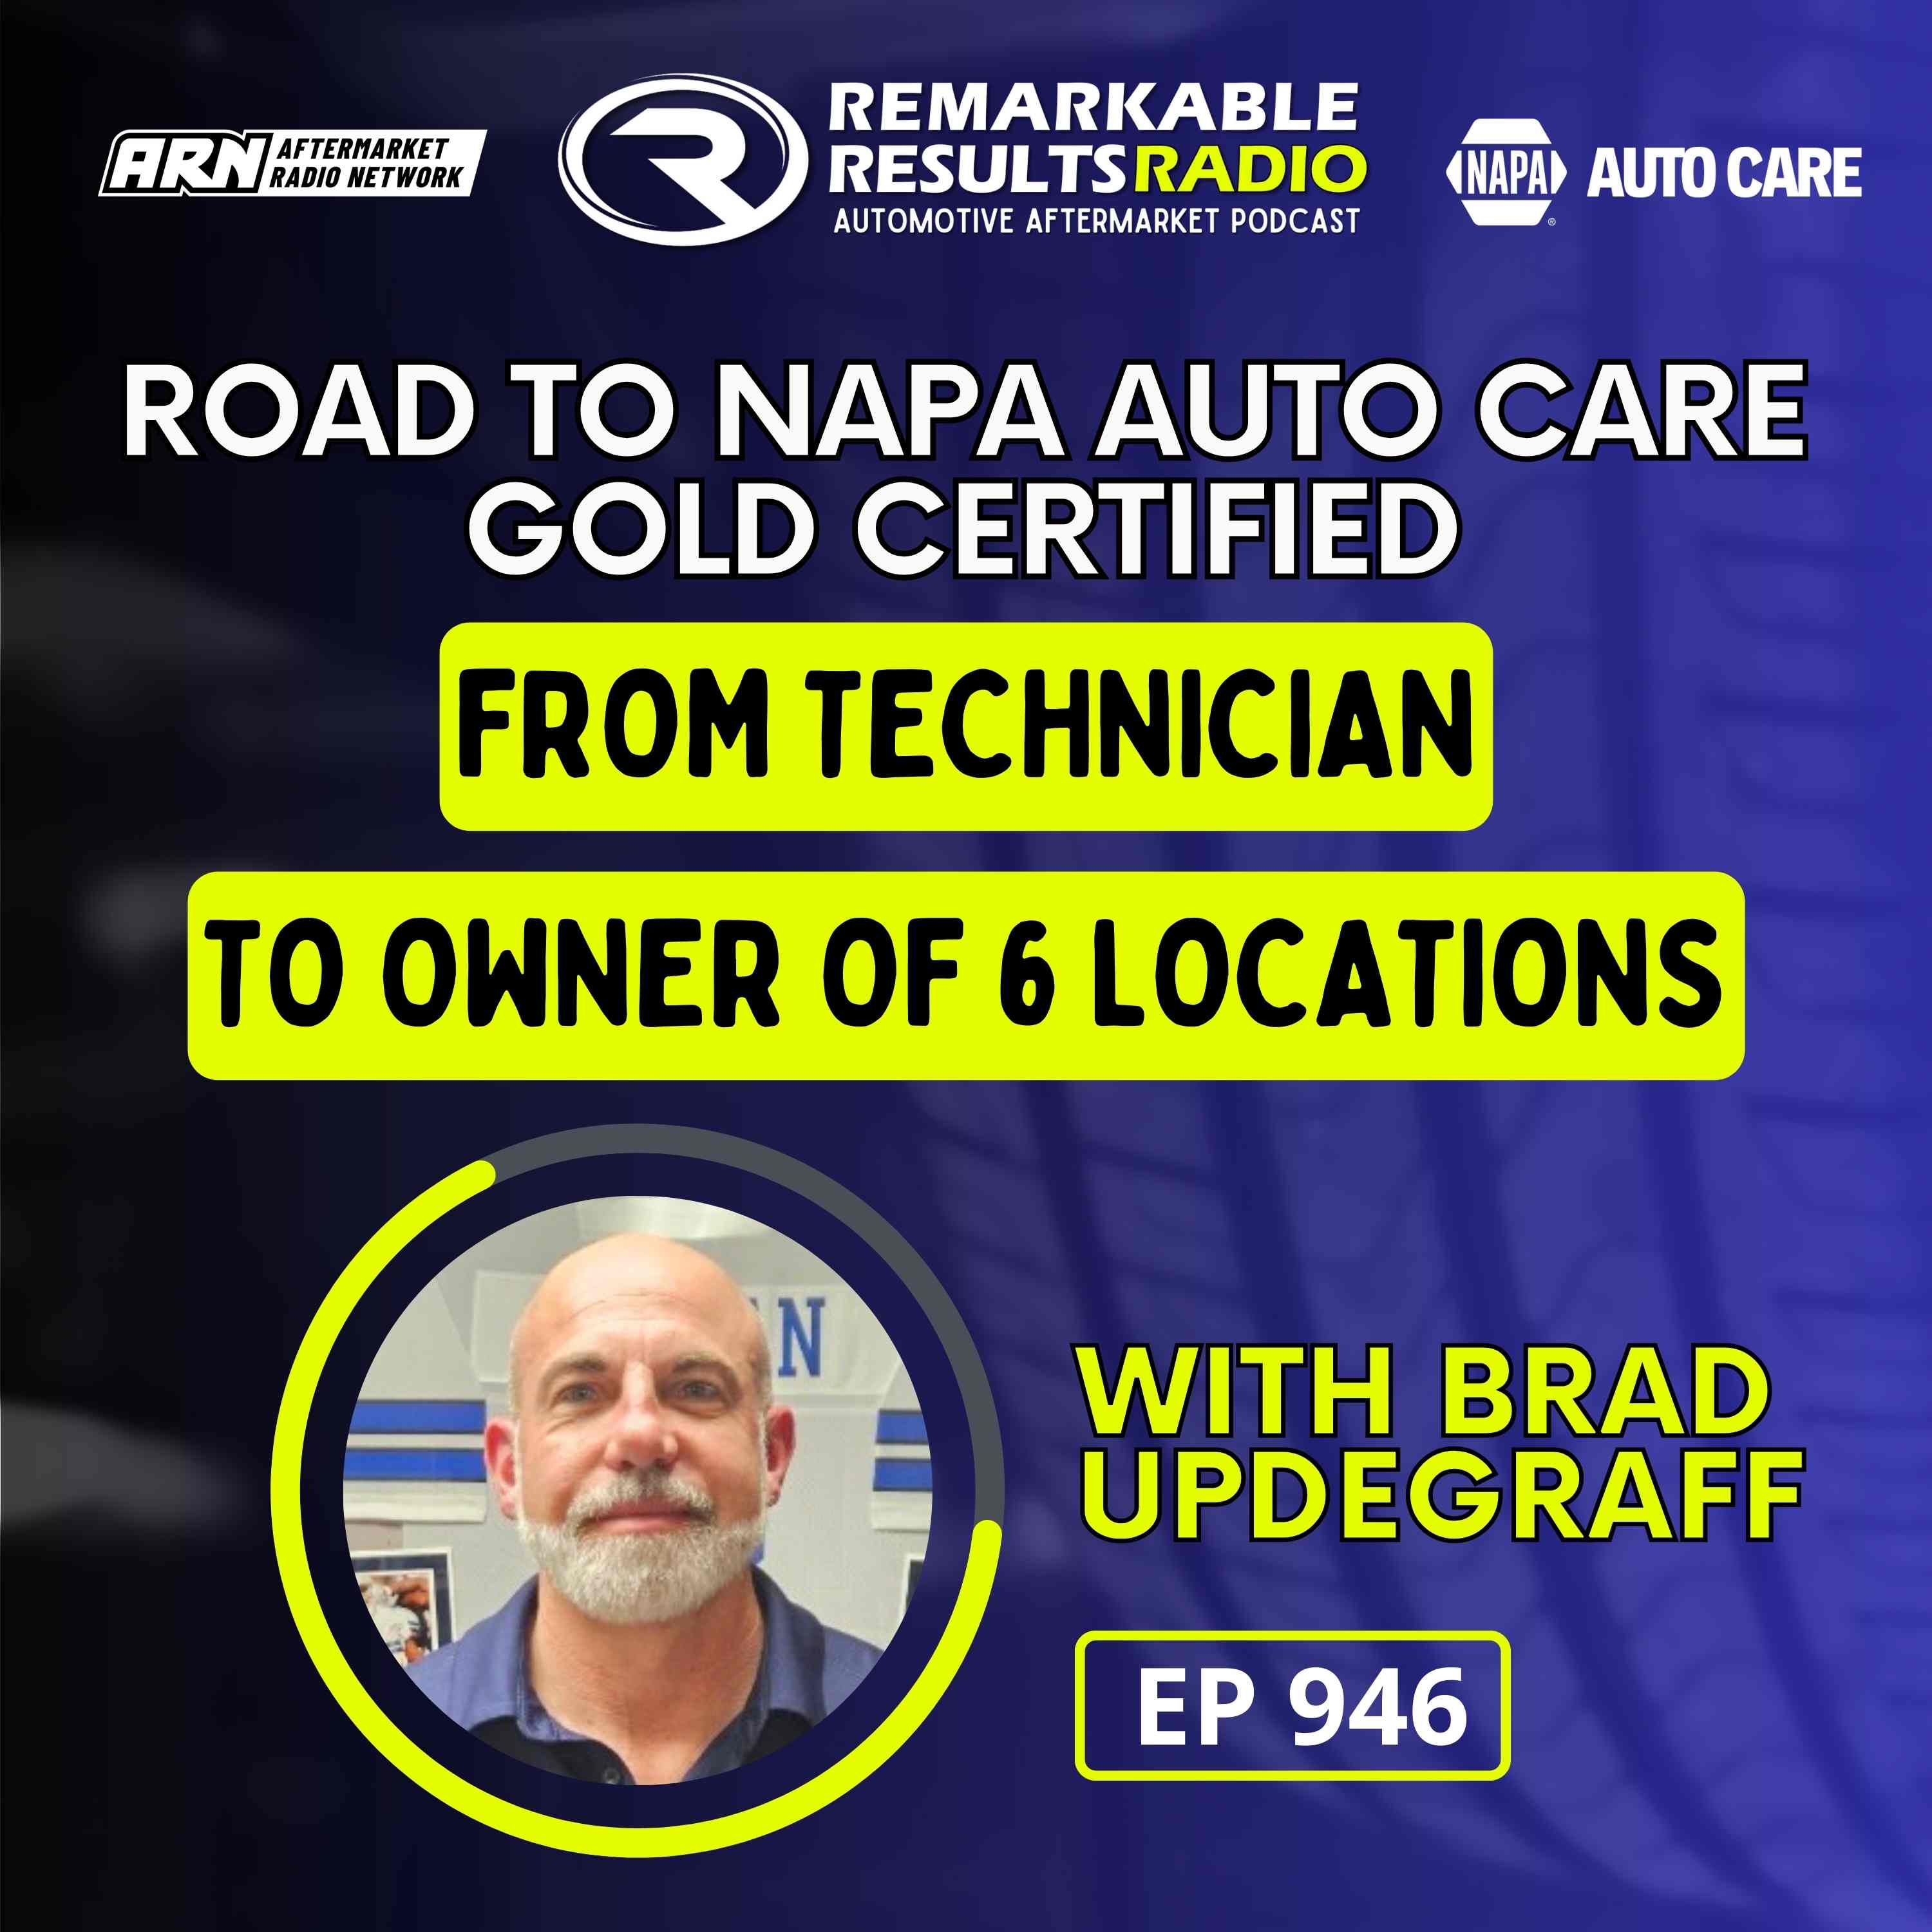 Road to NAPA Auto Care Gold Certified: From Technician to Owner of 6 Locations [RR 946]